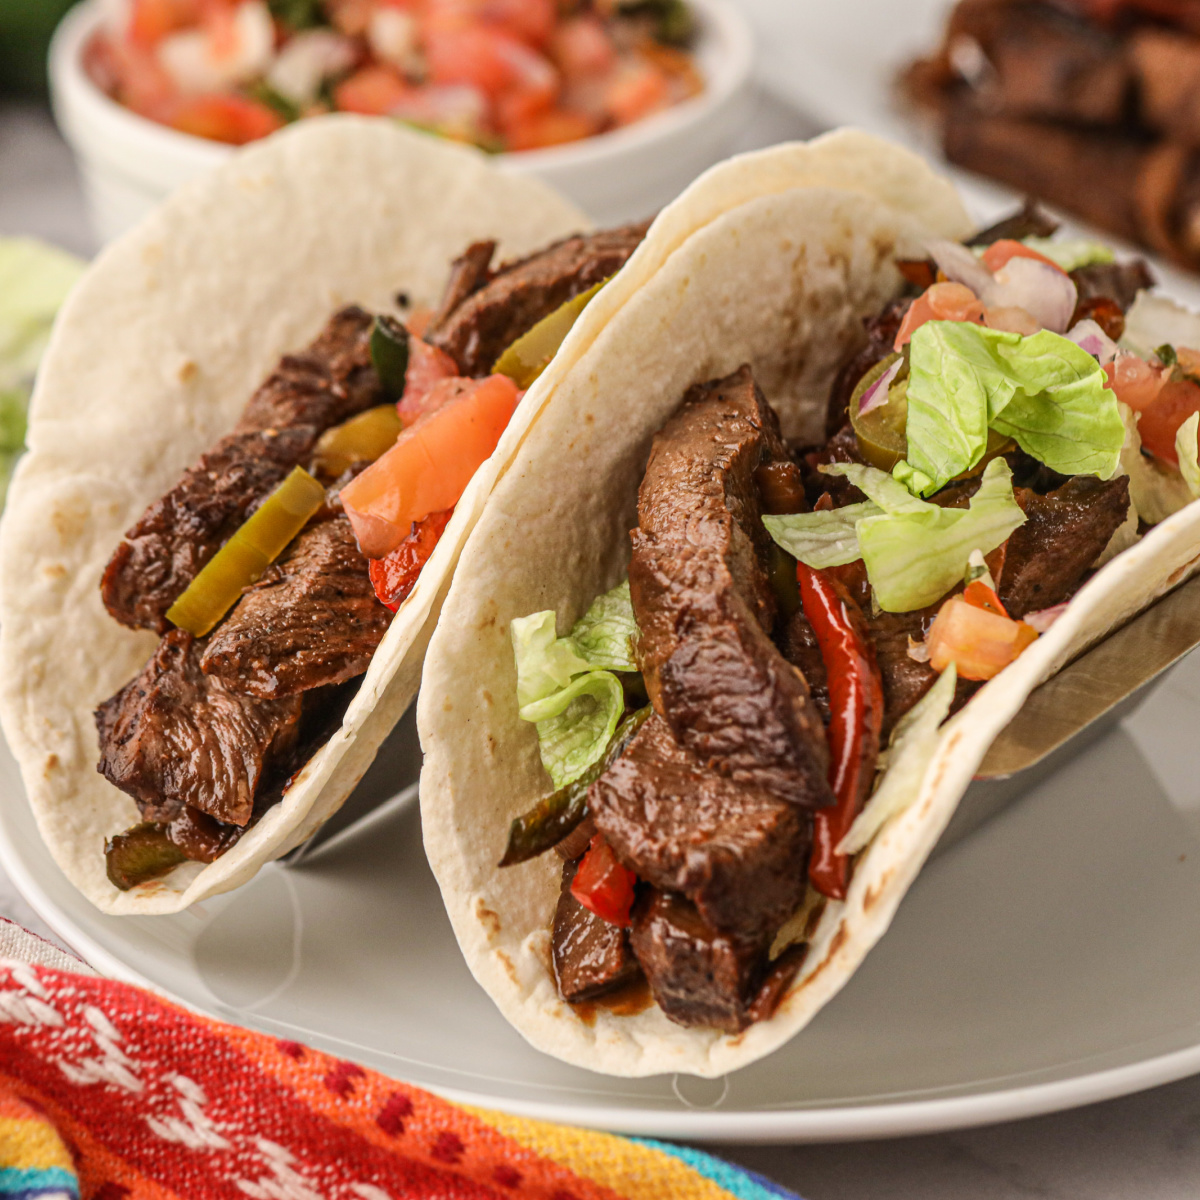 Grilled skirt steak fajitas on a plate ready to eat!